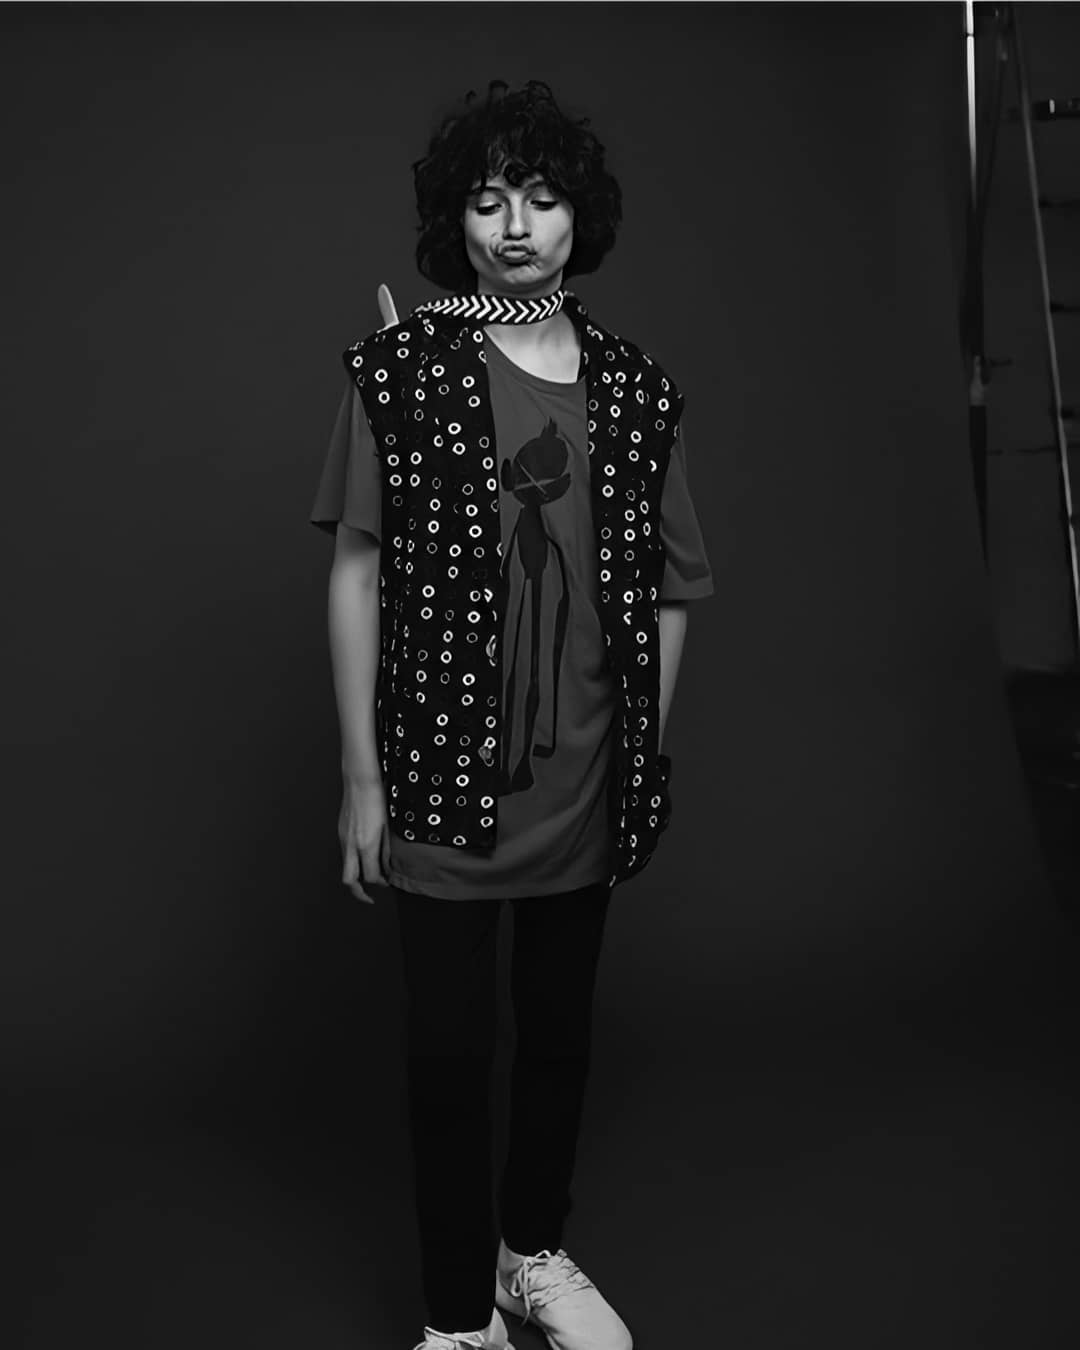 General picture of Finn Wolfhard - Photo 4967 of 7453. 